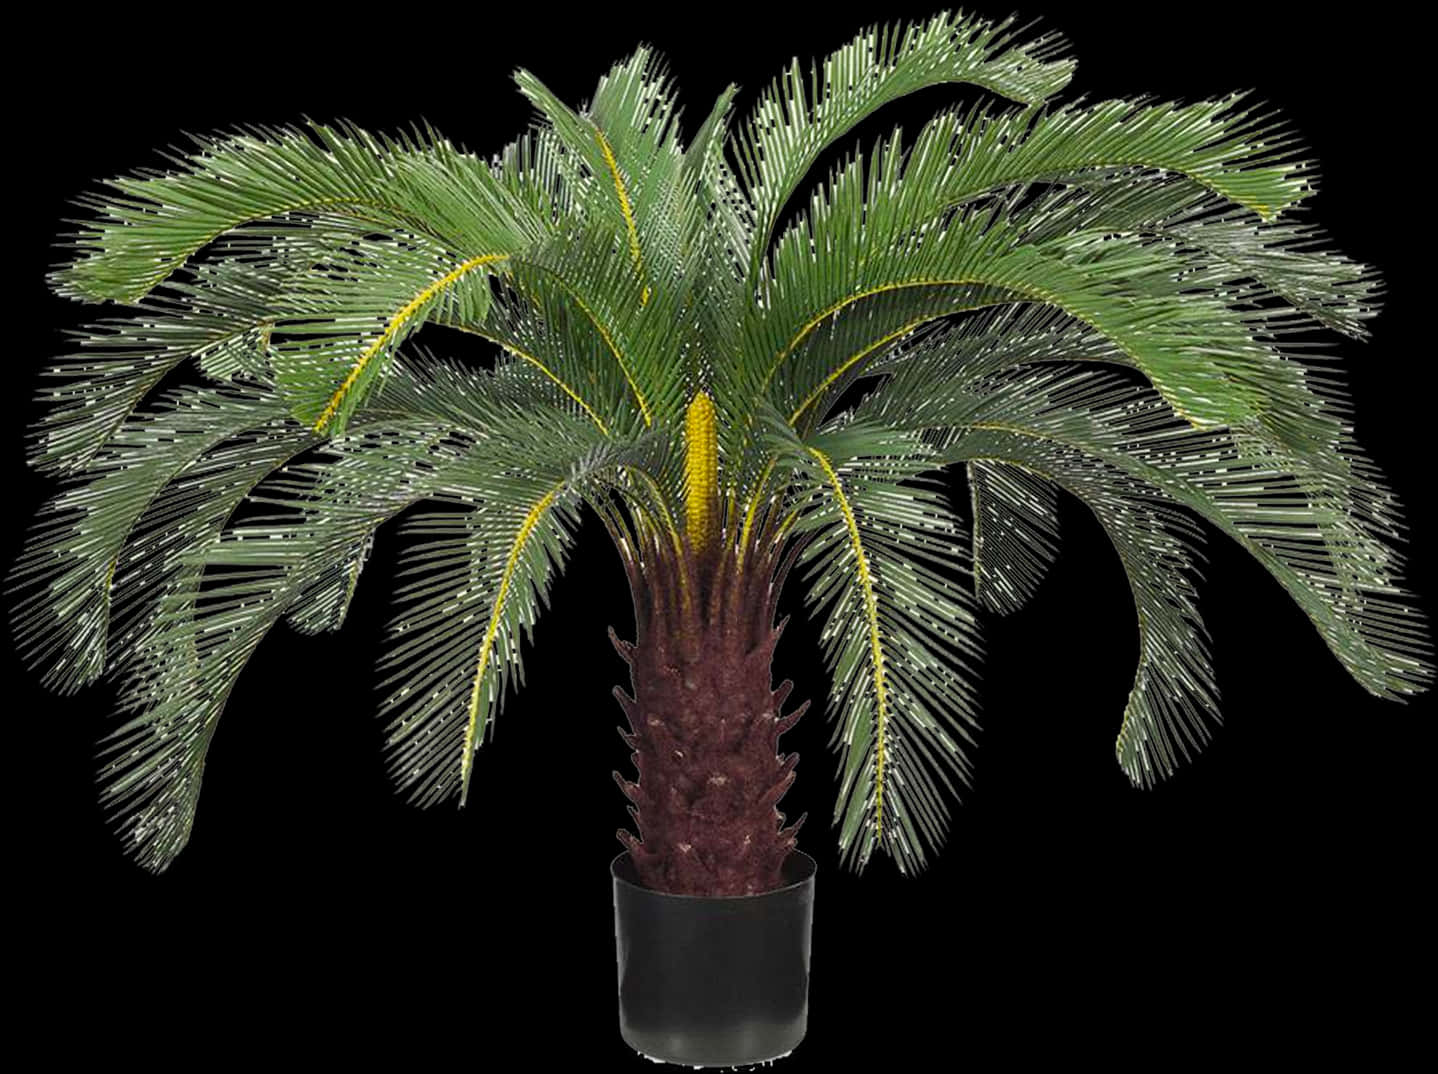 A Palm Tree In A Pot